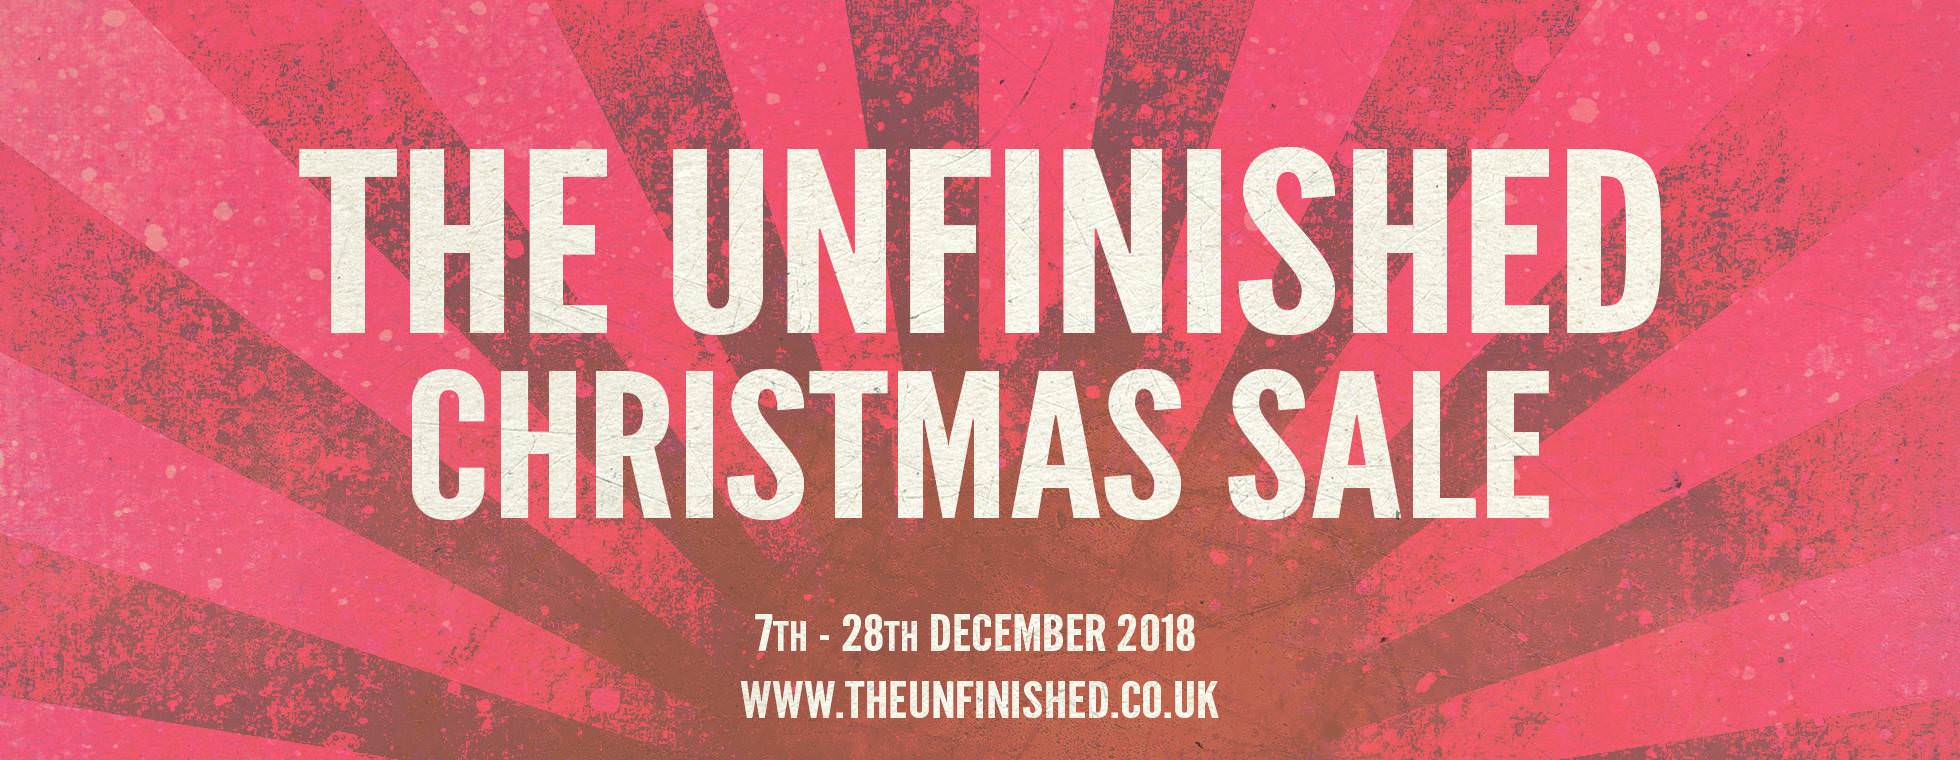 The Unfinished Christmas Sale is here